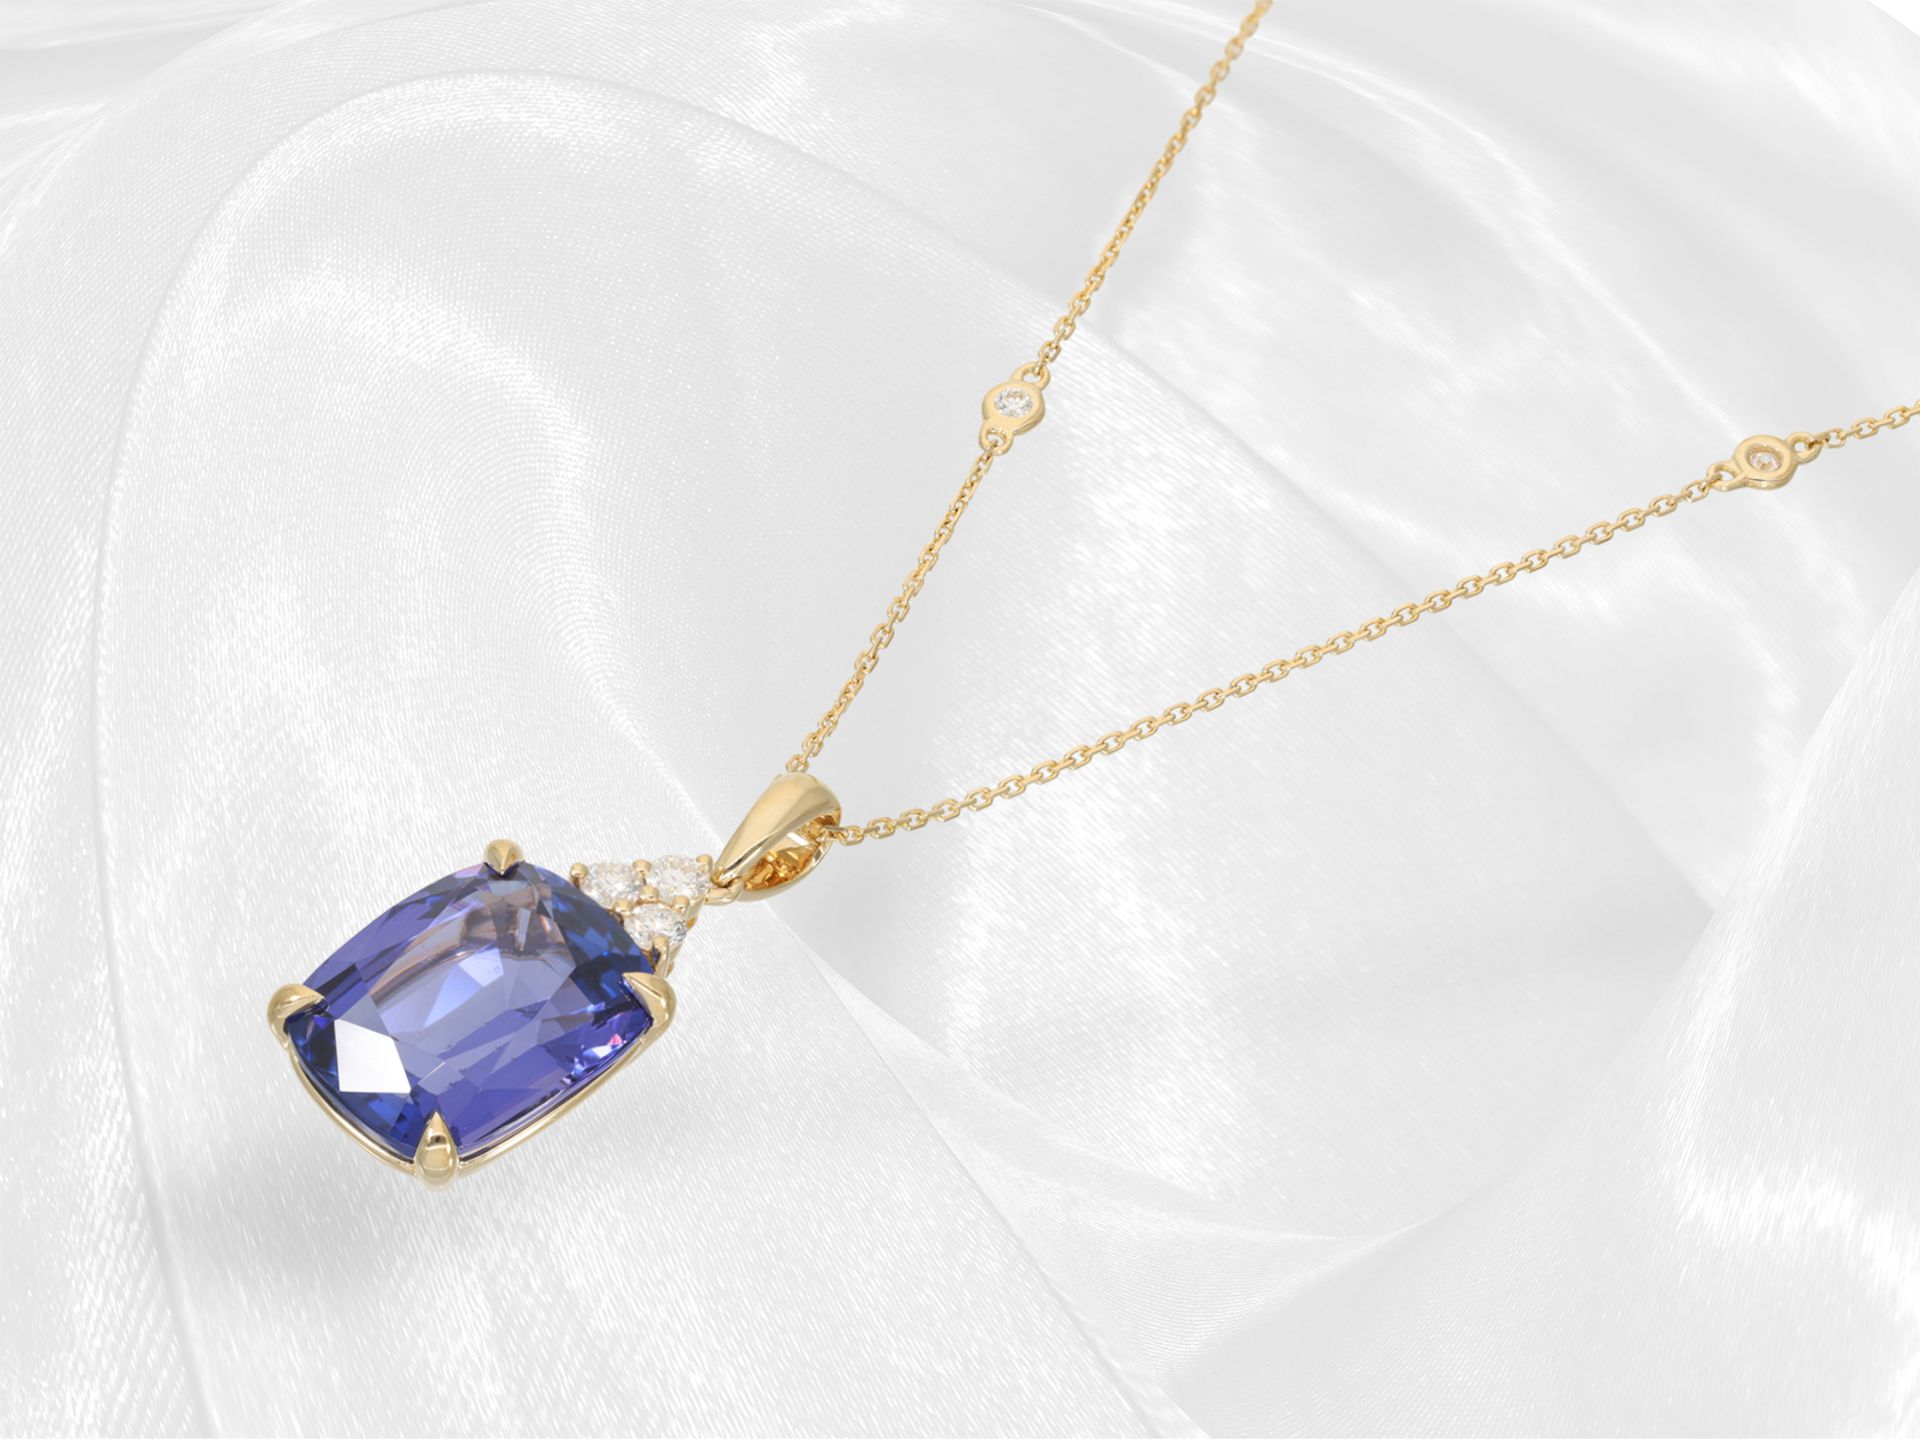 Exclusive, like new tanzanite/brilliant-cut diamond necklace with large tanzanite of 11.15ct in very - Image 9 of 10